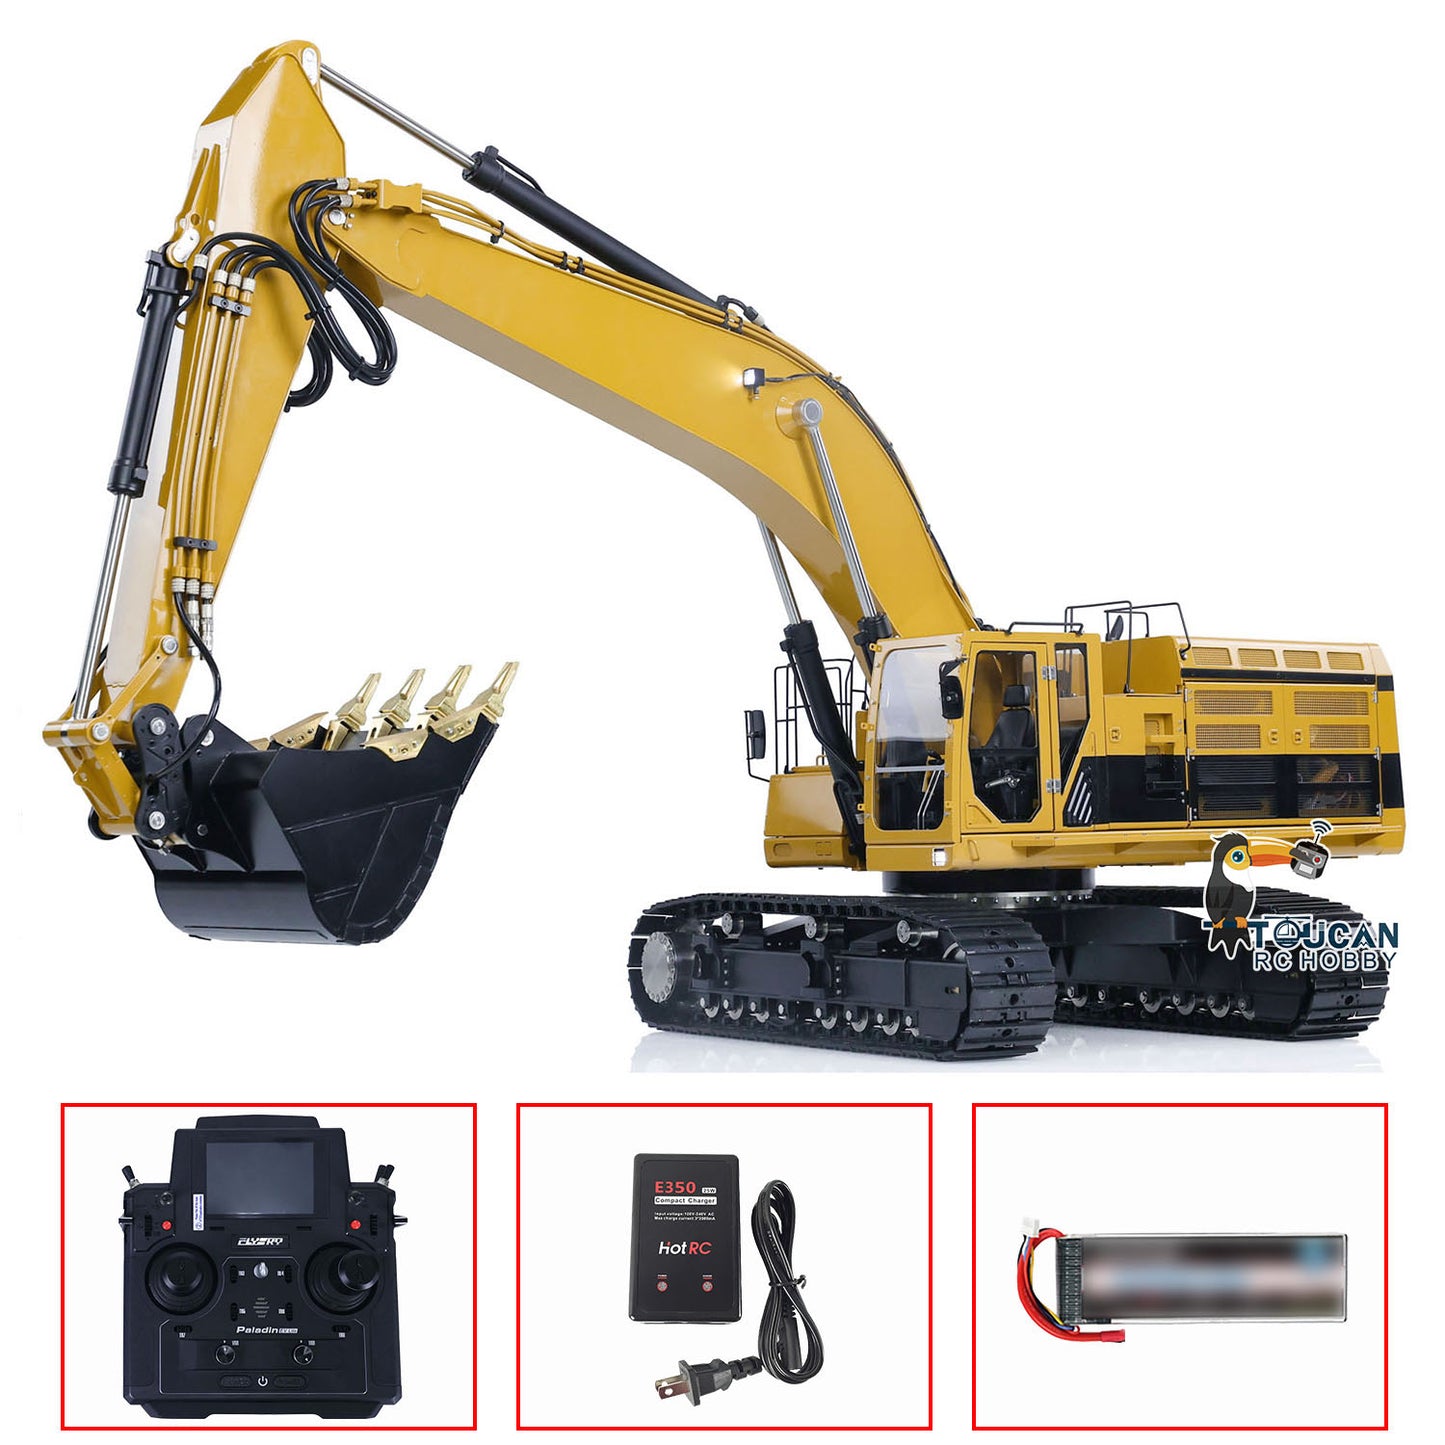 IN STOCK LESU Metal 374F 1/14 RC Hydraulic Excavators PL18EV Lite Radio Controlled Digger PNP RTR Painted Assembled Hobby Model Toy Gift